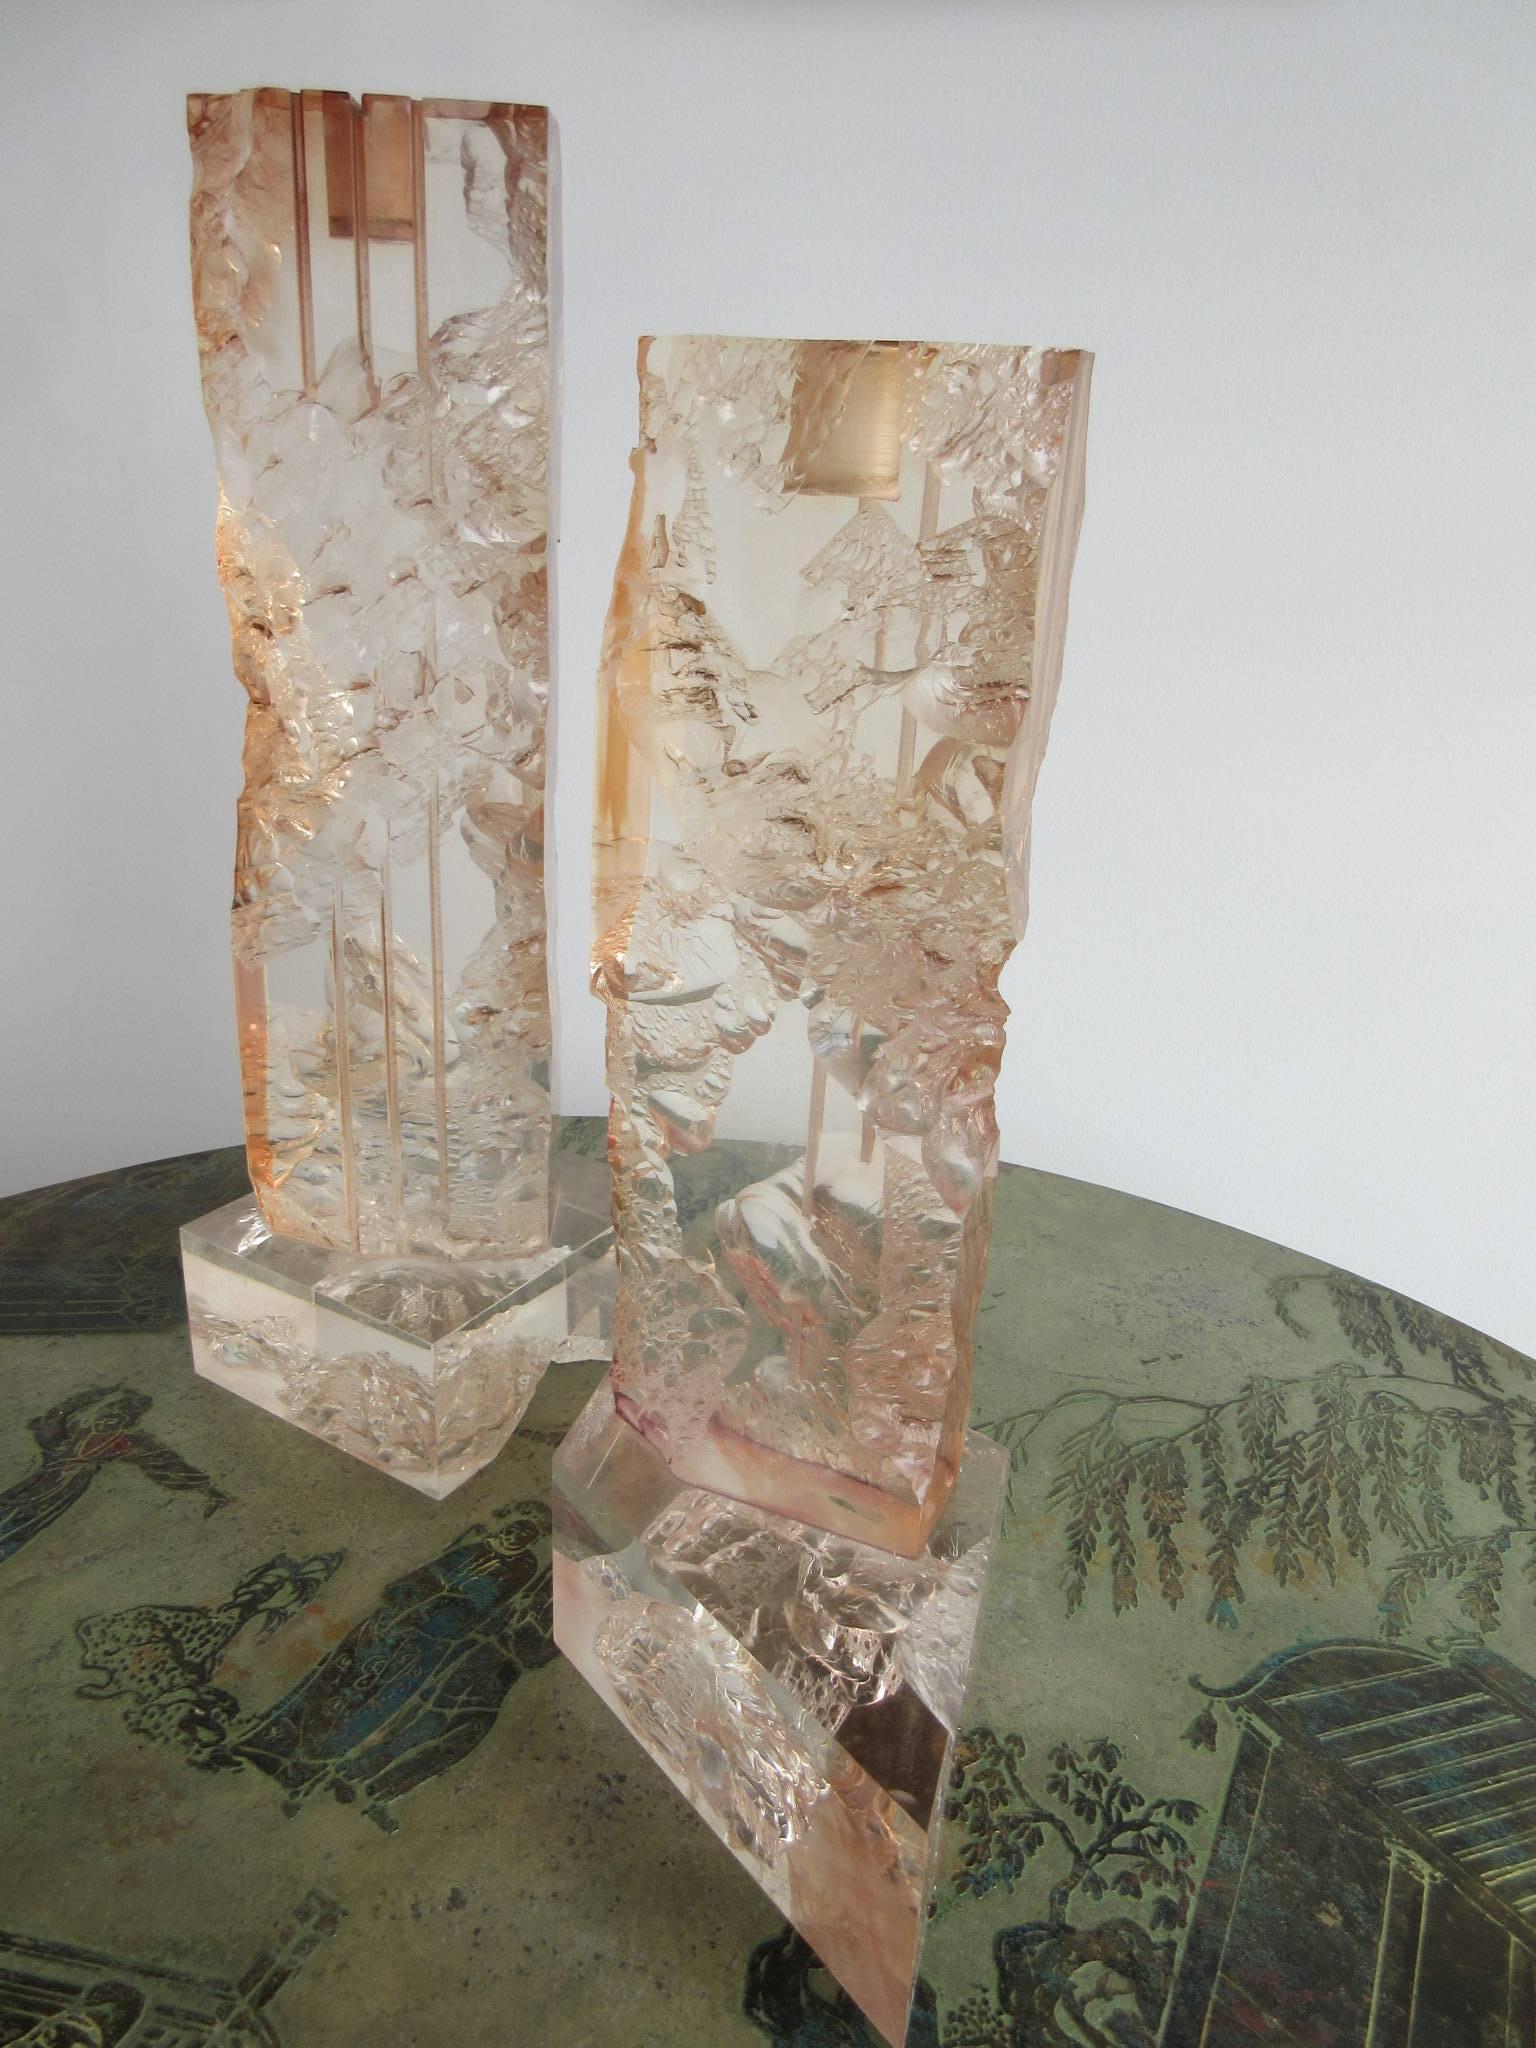 Pair of champagne colored fractal resin candlesticks, circa 1970s.


Tall candleholder measures:
17" H
5 1/2" W
8" D

Small candleholder measures:
14 3/4" H
6 1/2" W
5 1/4" D.